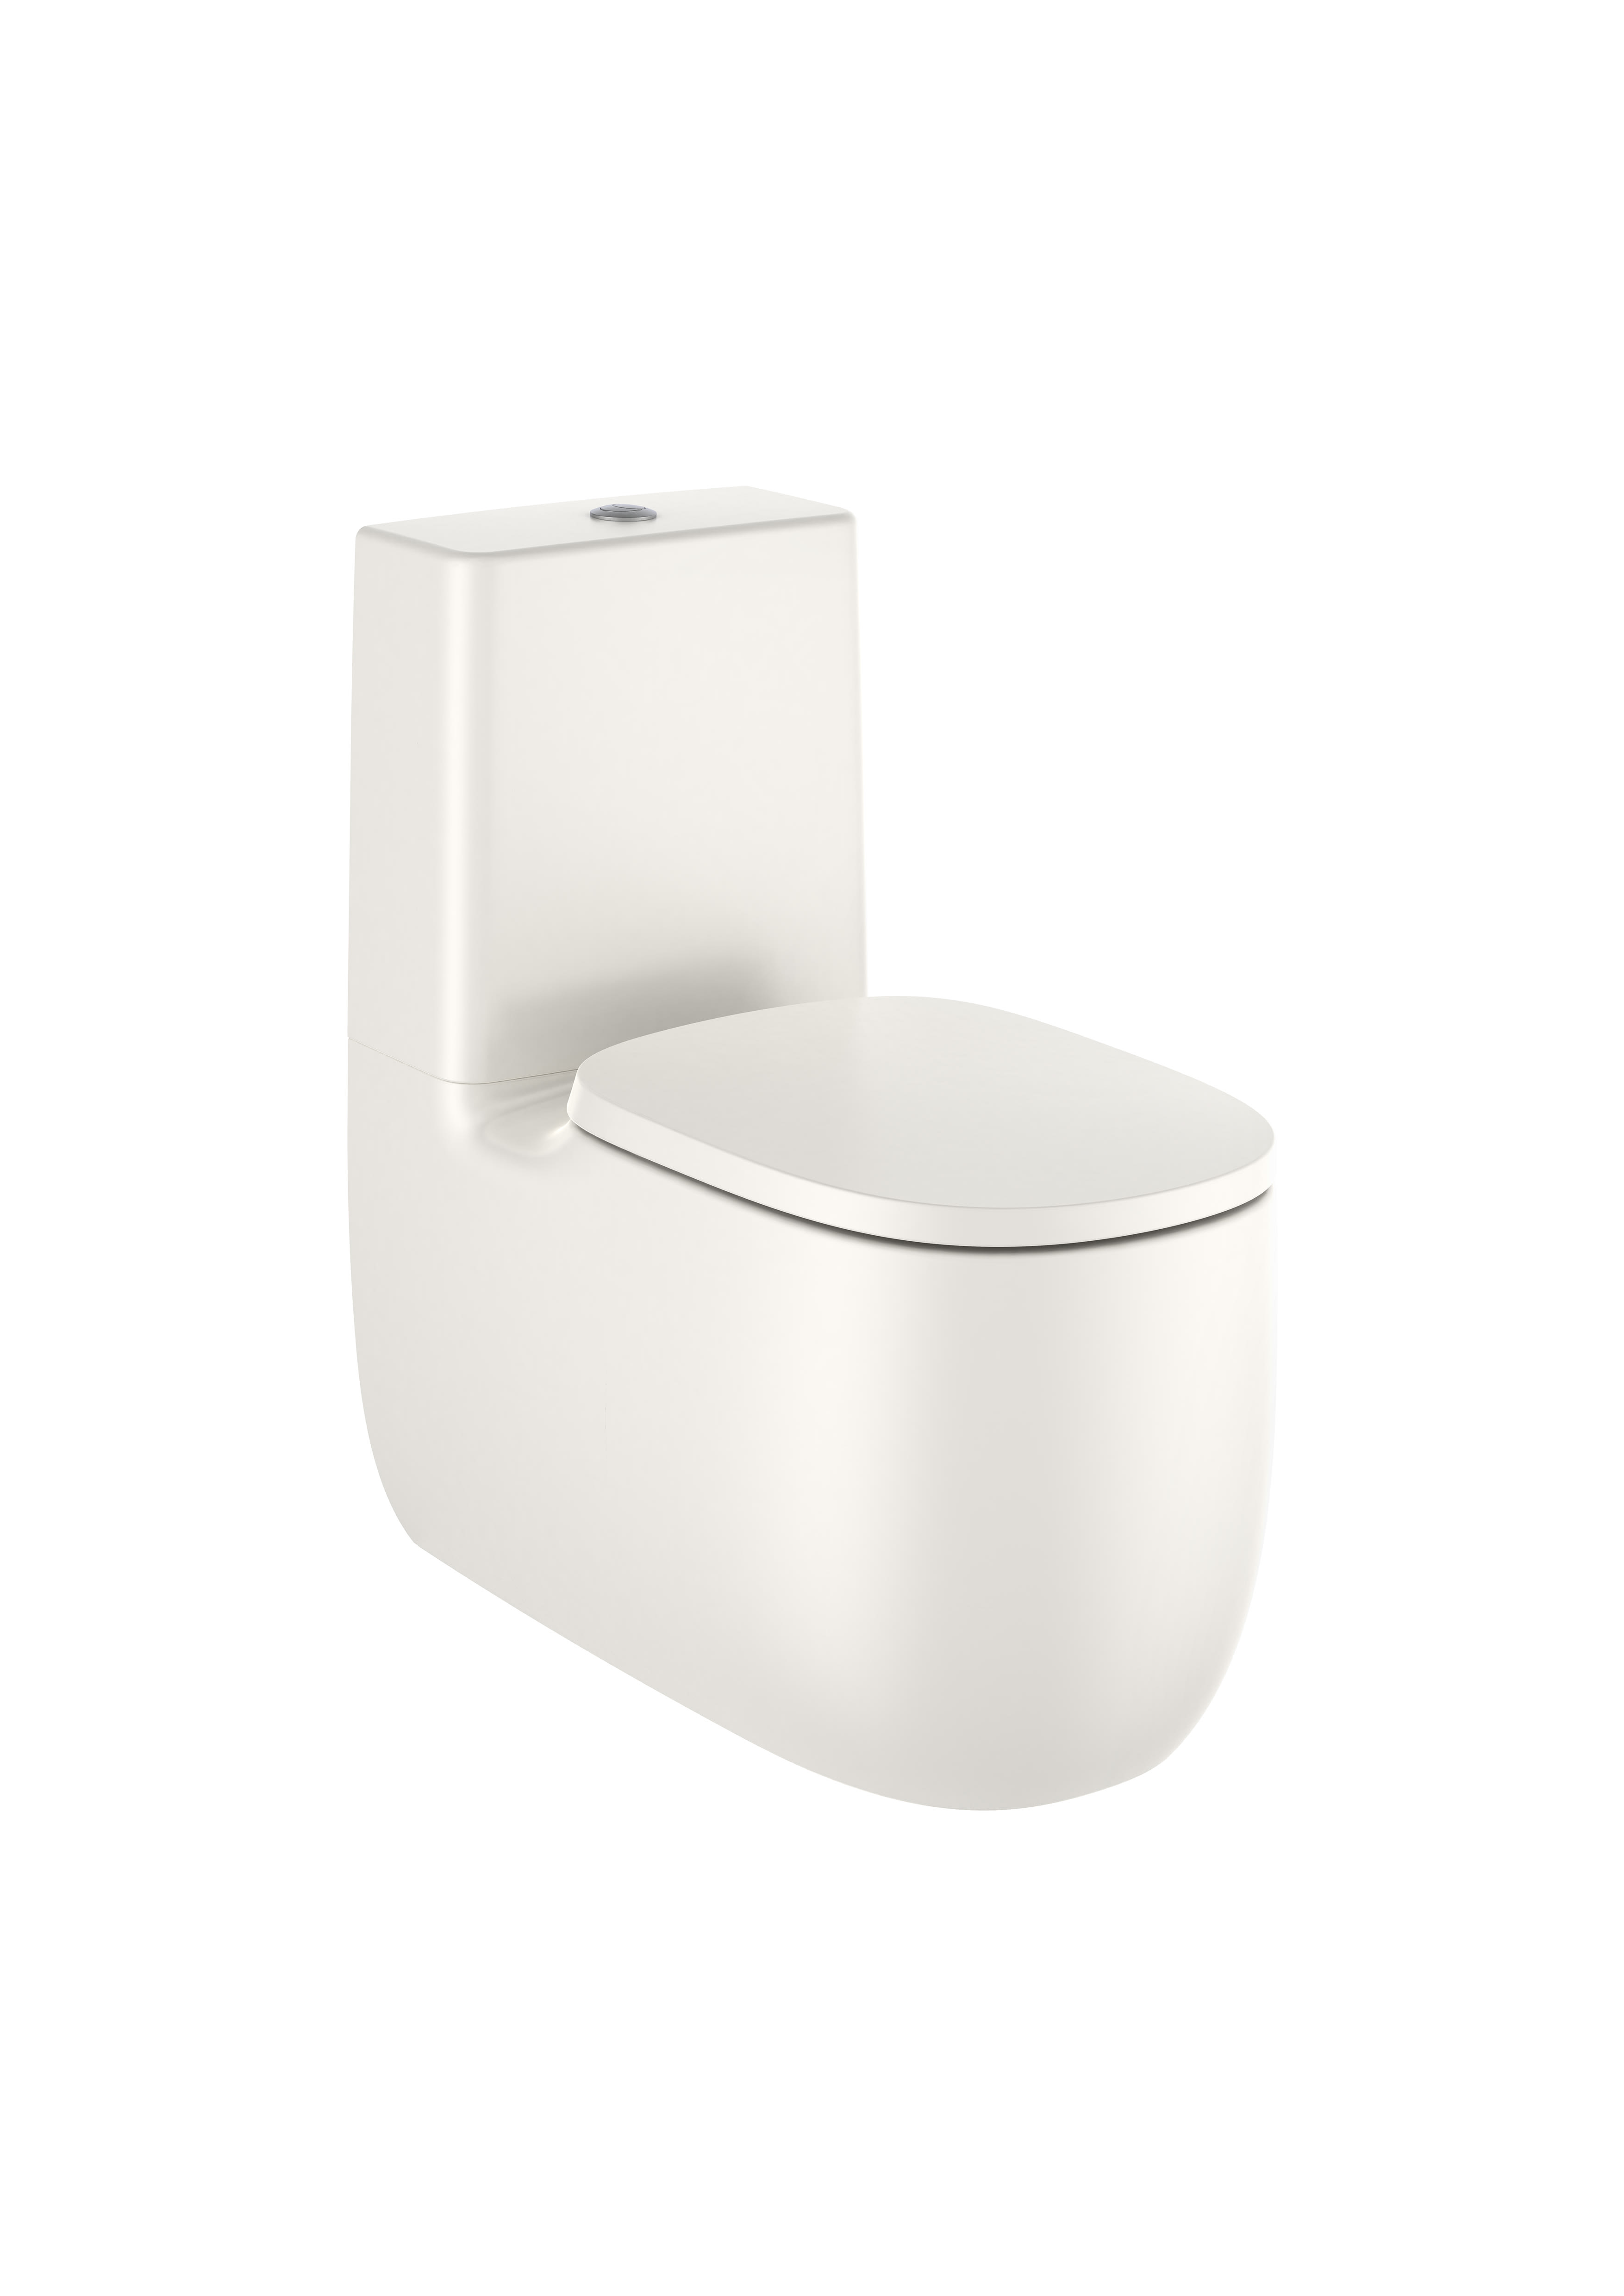 Toilet seats and covers Beige Beyond A801B8265B Roca